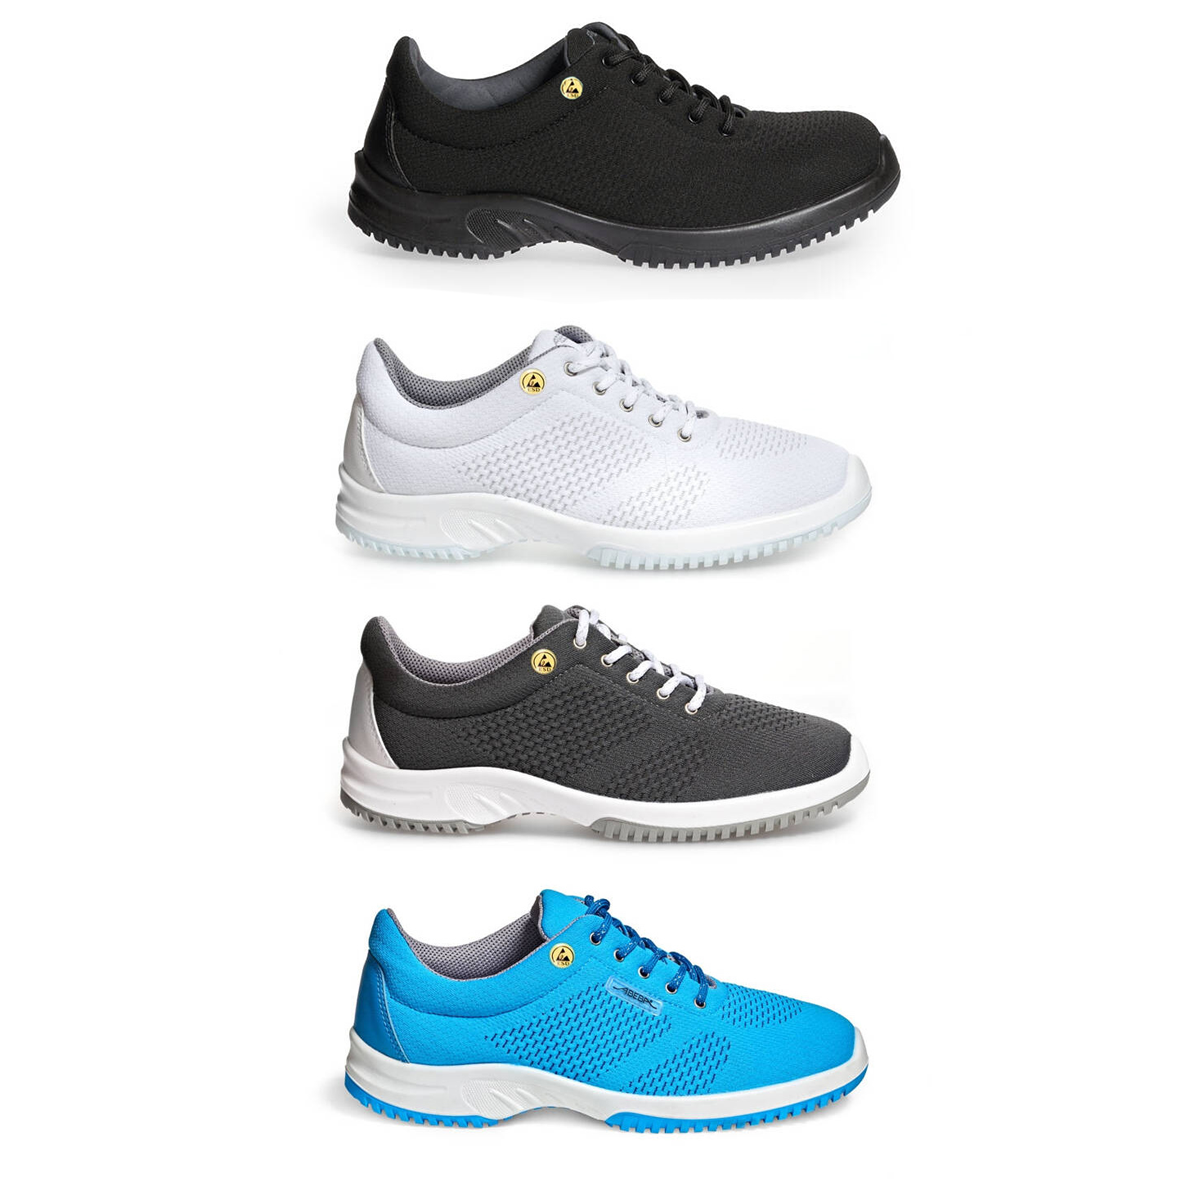 ESD ladies - and men's lace-up shoe / safety shoe